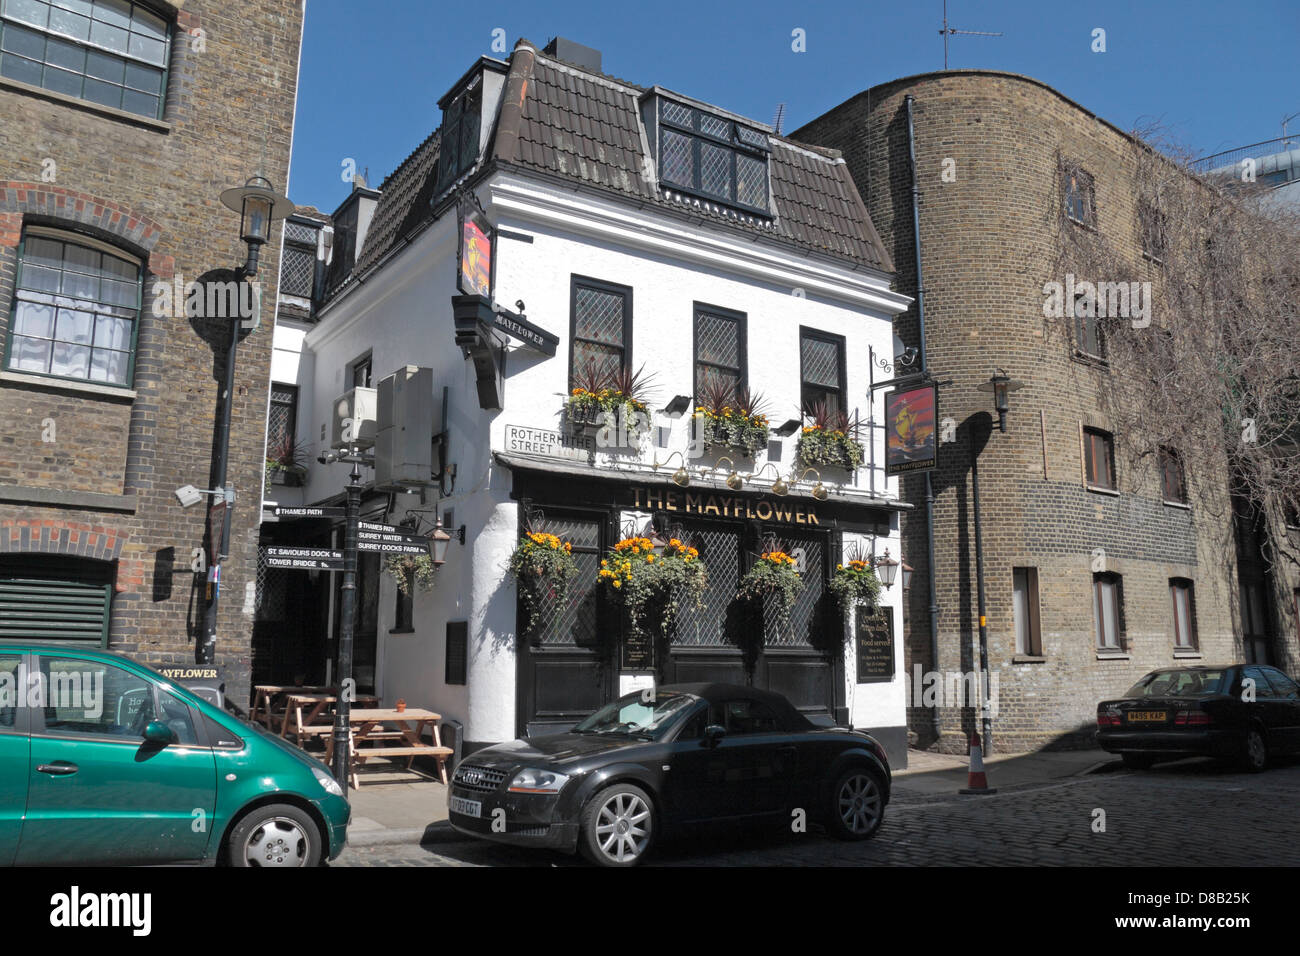 The Mayflower public house, the oldest pub on the River Thames, Rotherhithe Street, Rotherhithe, London, SE16, UK. Stock Photo